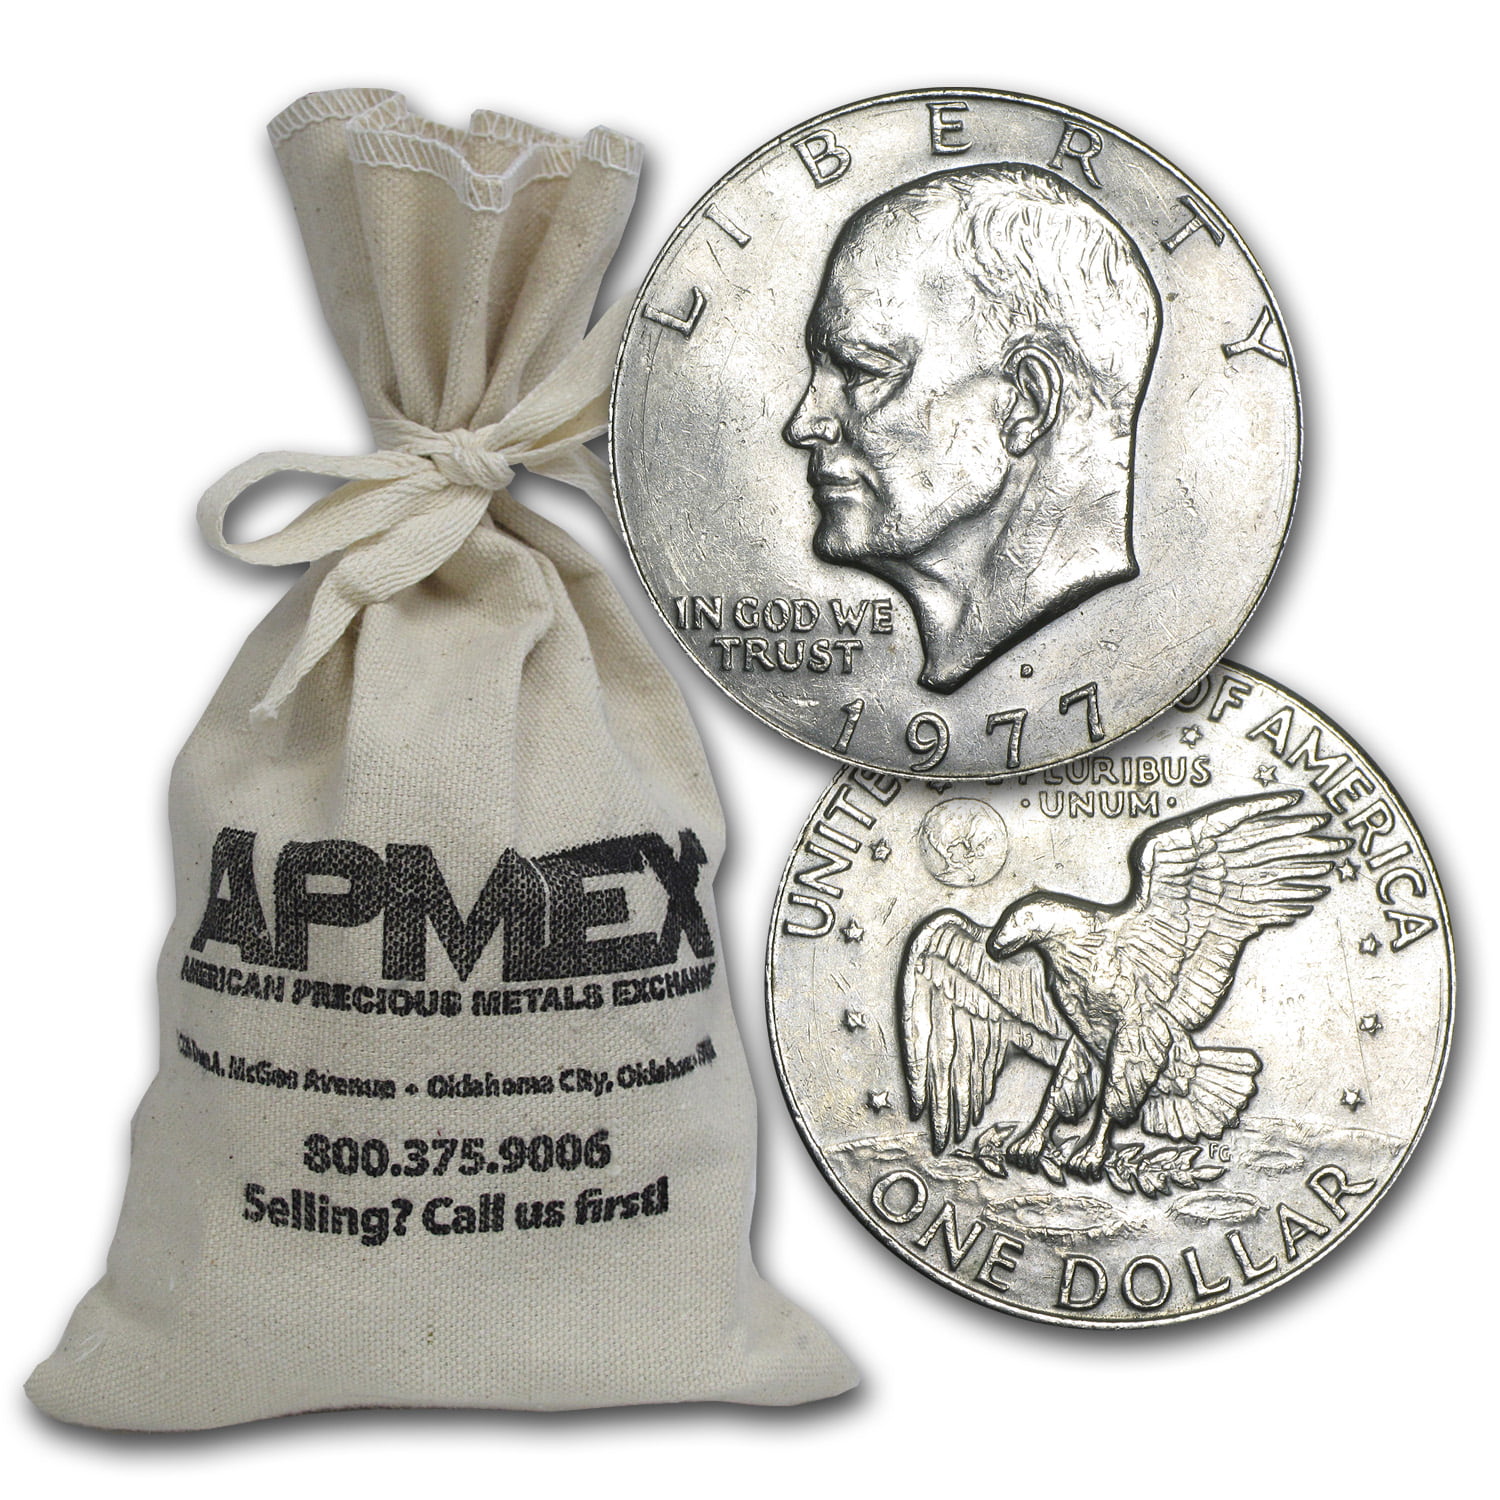 300 COIN WRAPPERS FOR MORGAN PEACE EISENHOWER IKE SILVER DOLLAR COINS PAPER 